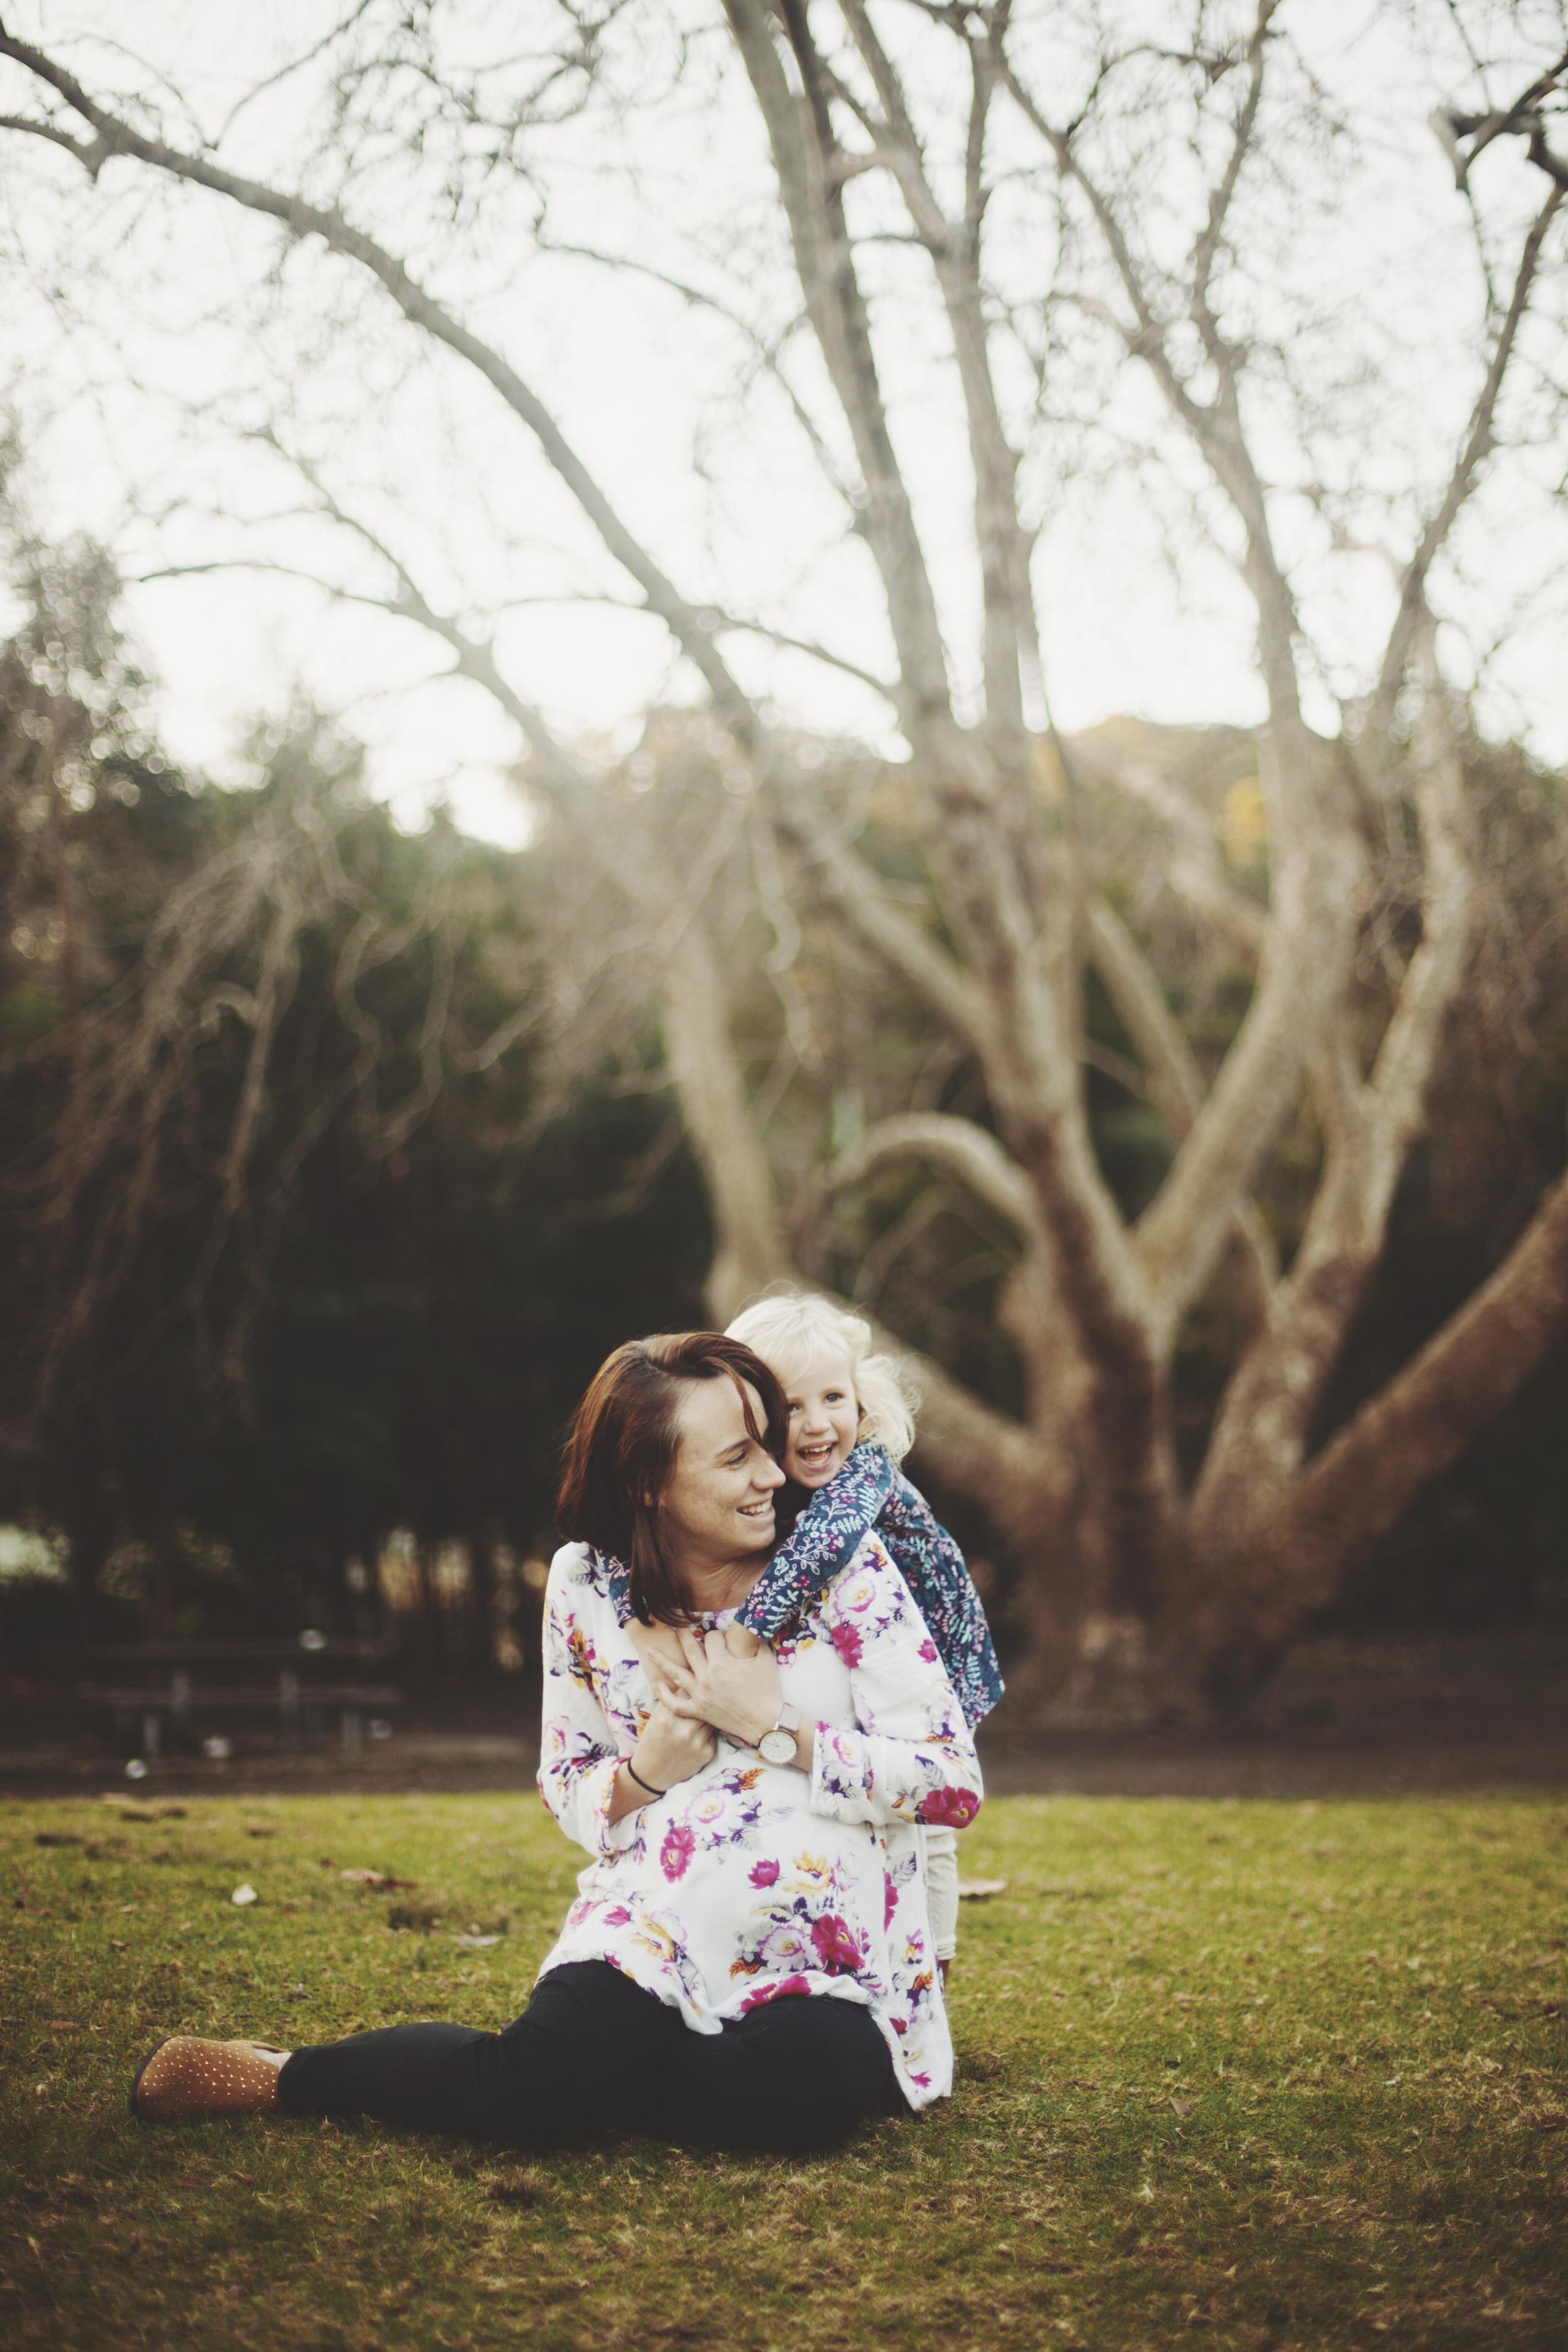 mother and daughter laughing on grass